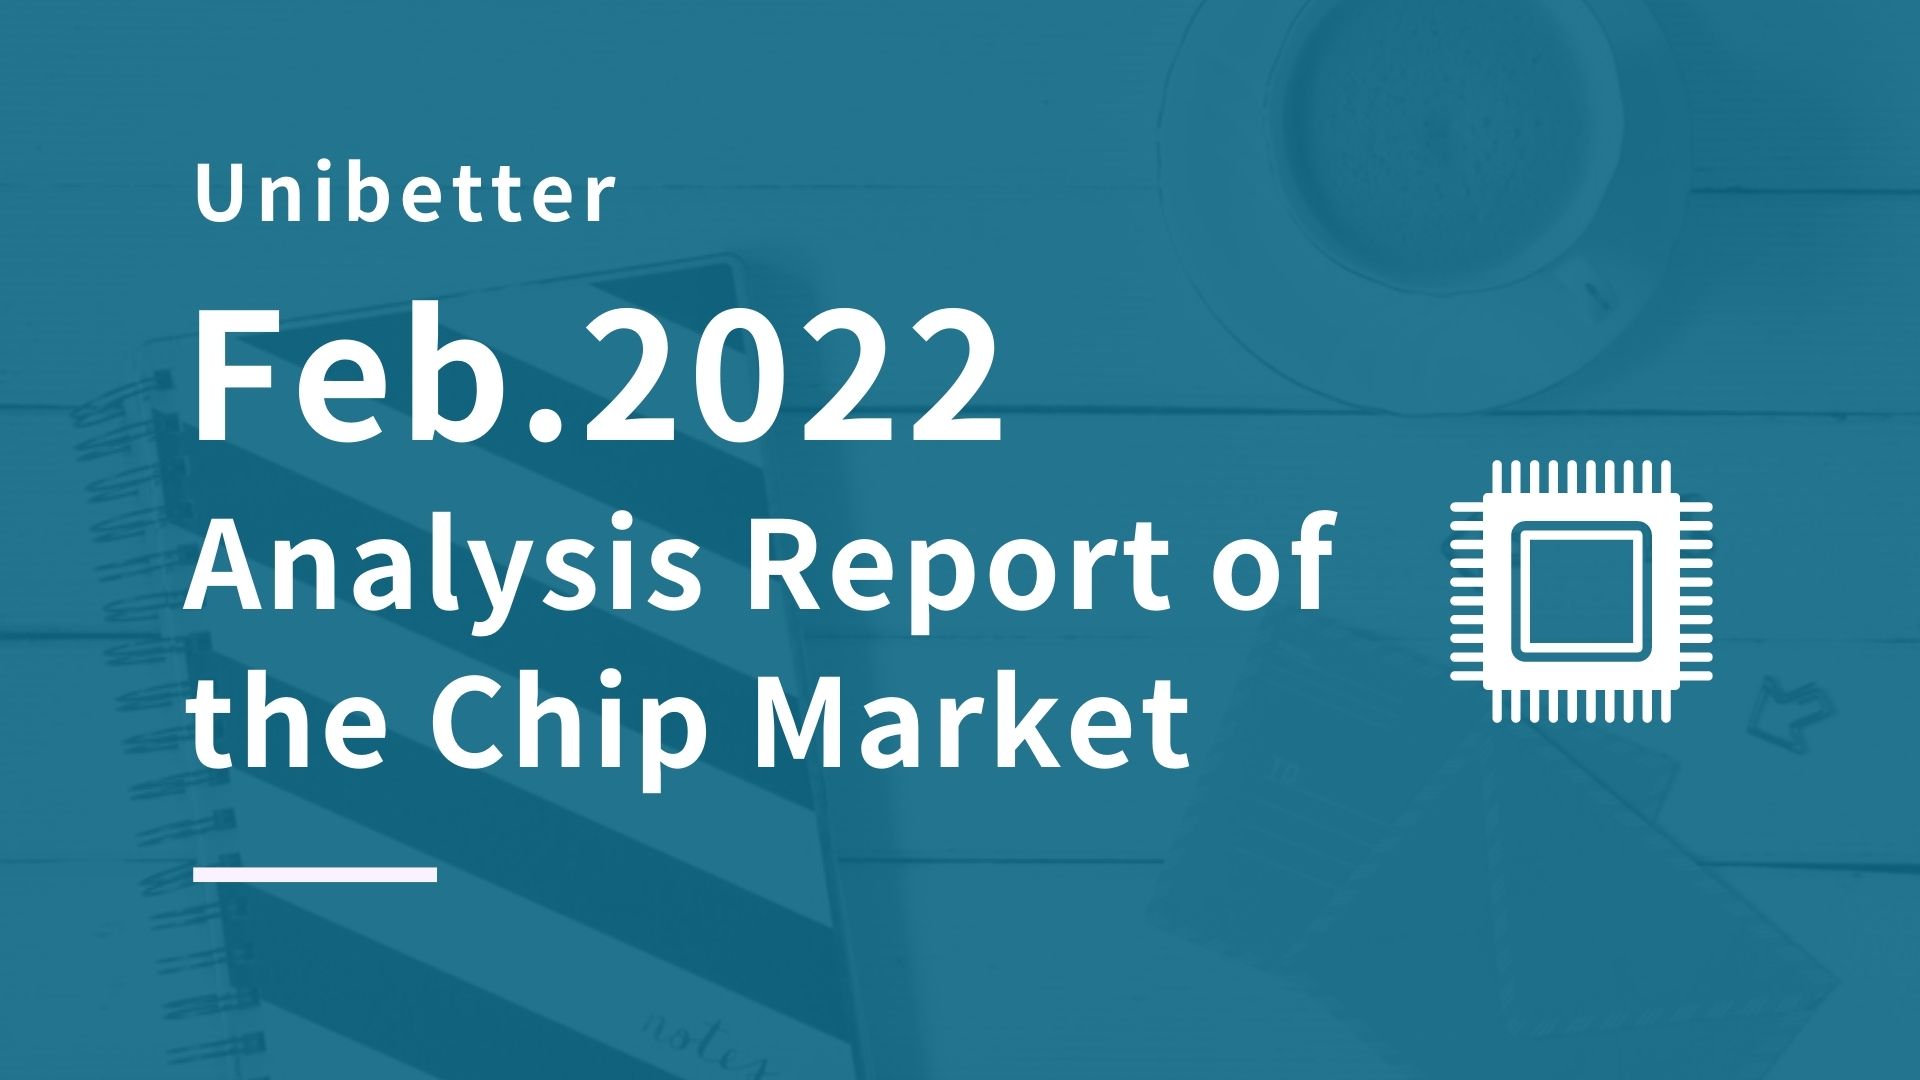 Analysis Report of the Chip Market February 2022 Unibetter